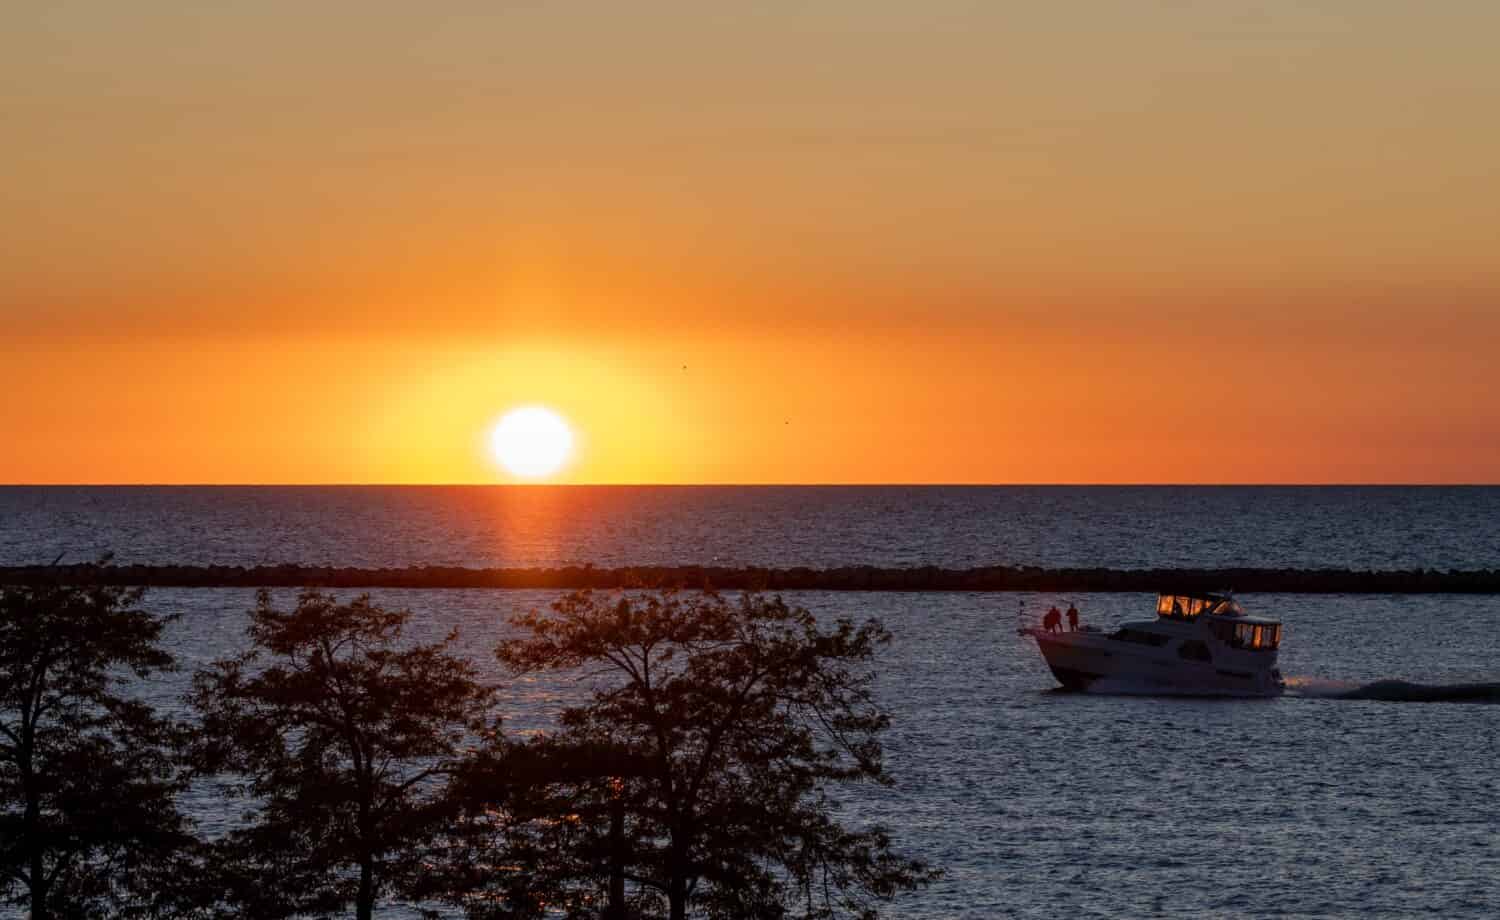 Boat shipping into the sunset on one of the Great Lakes, Lake Erie, Cleveland, Ohio